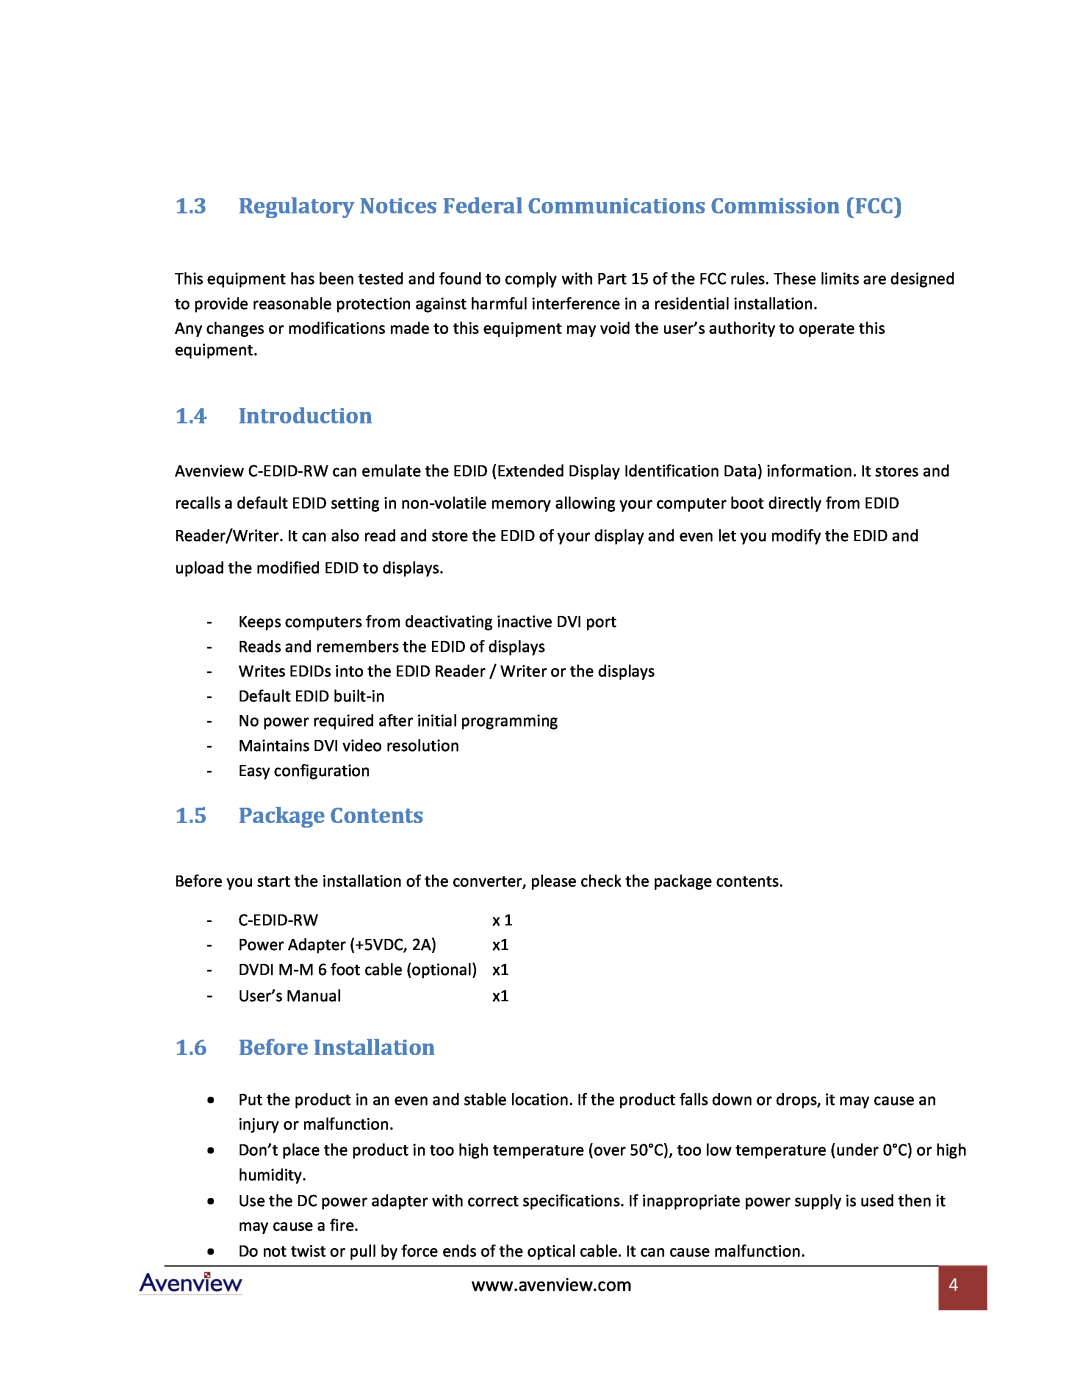 Avenview C-EDID-RW specifications Regulatory Notices Federal Communications Commission FCC, Introduction, Package Contents 